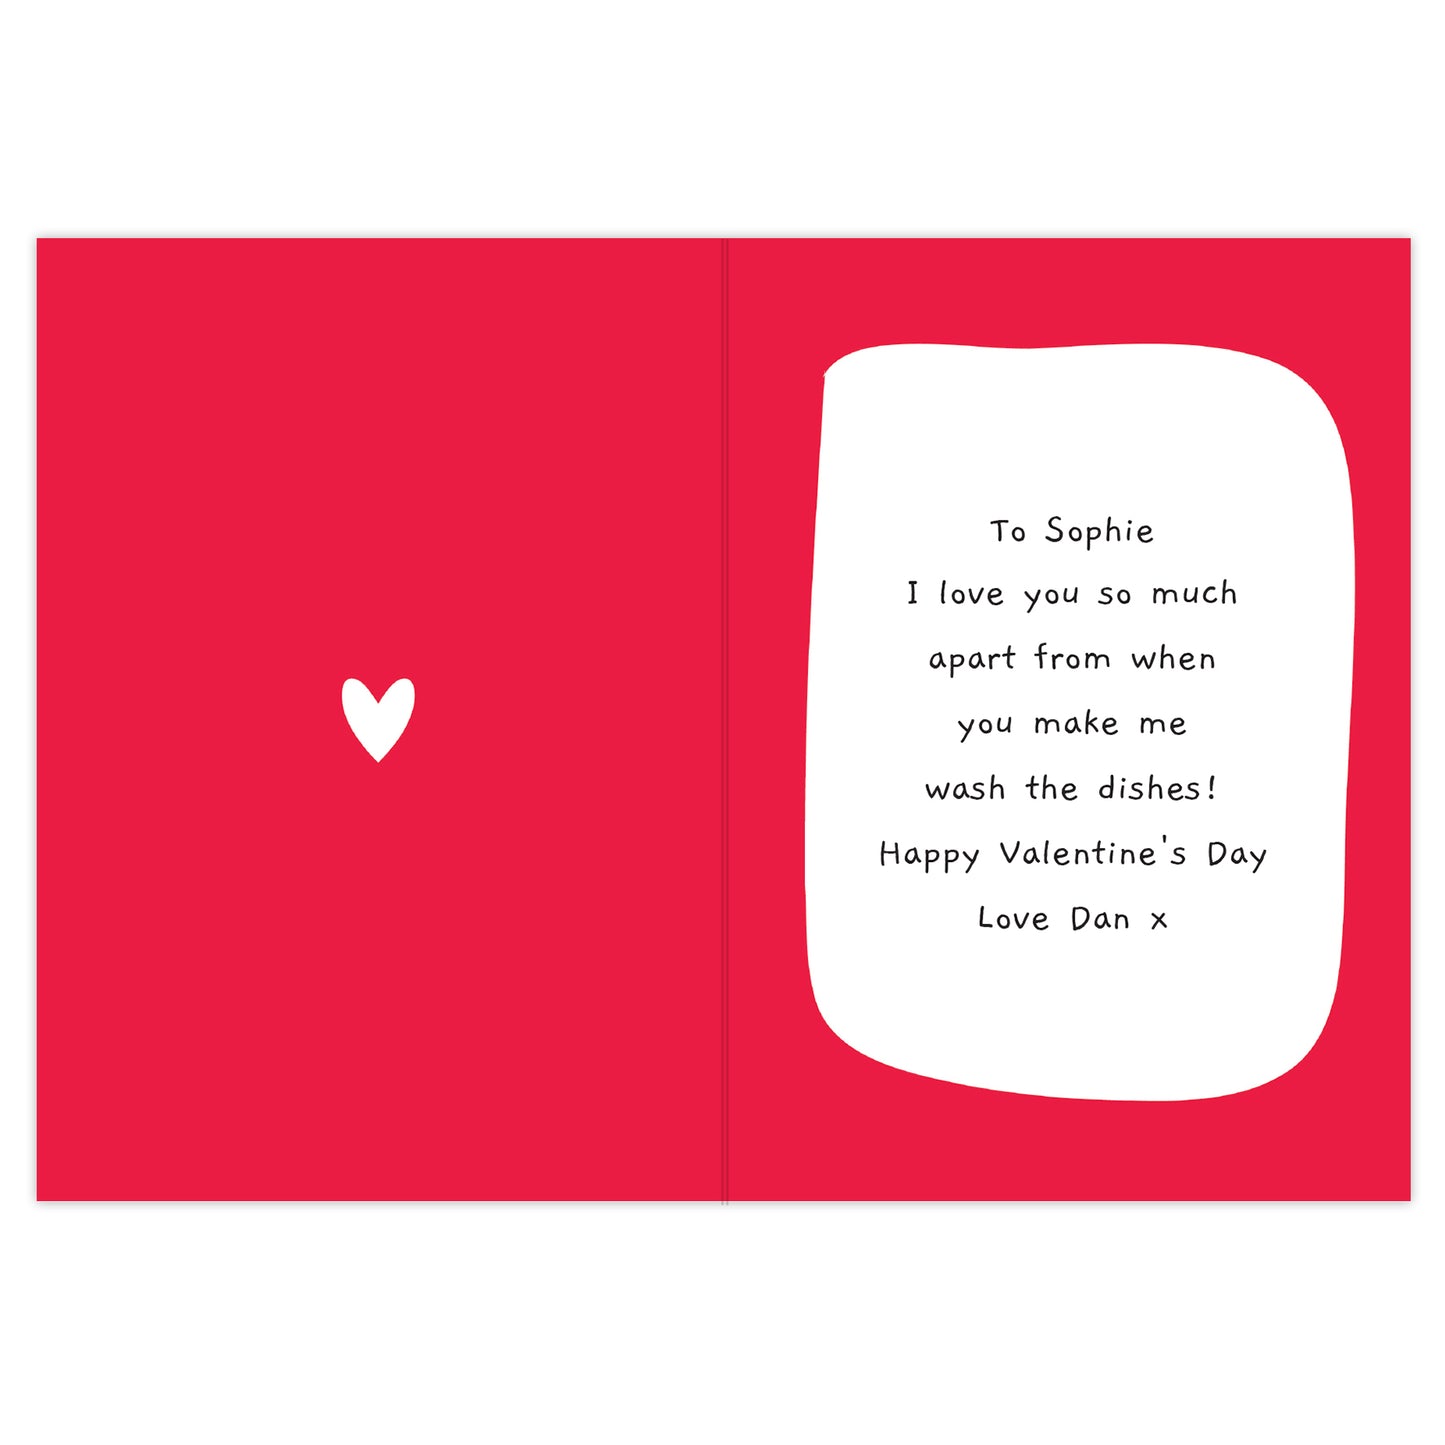 Personalised 'I Love You - Most Of The Time' Card